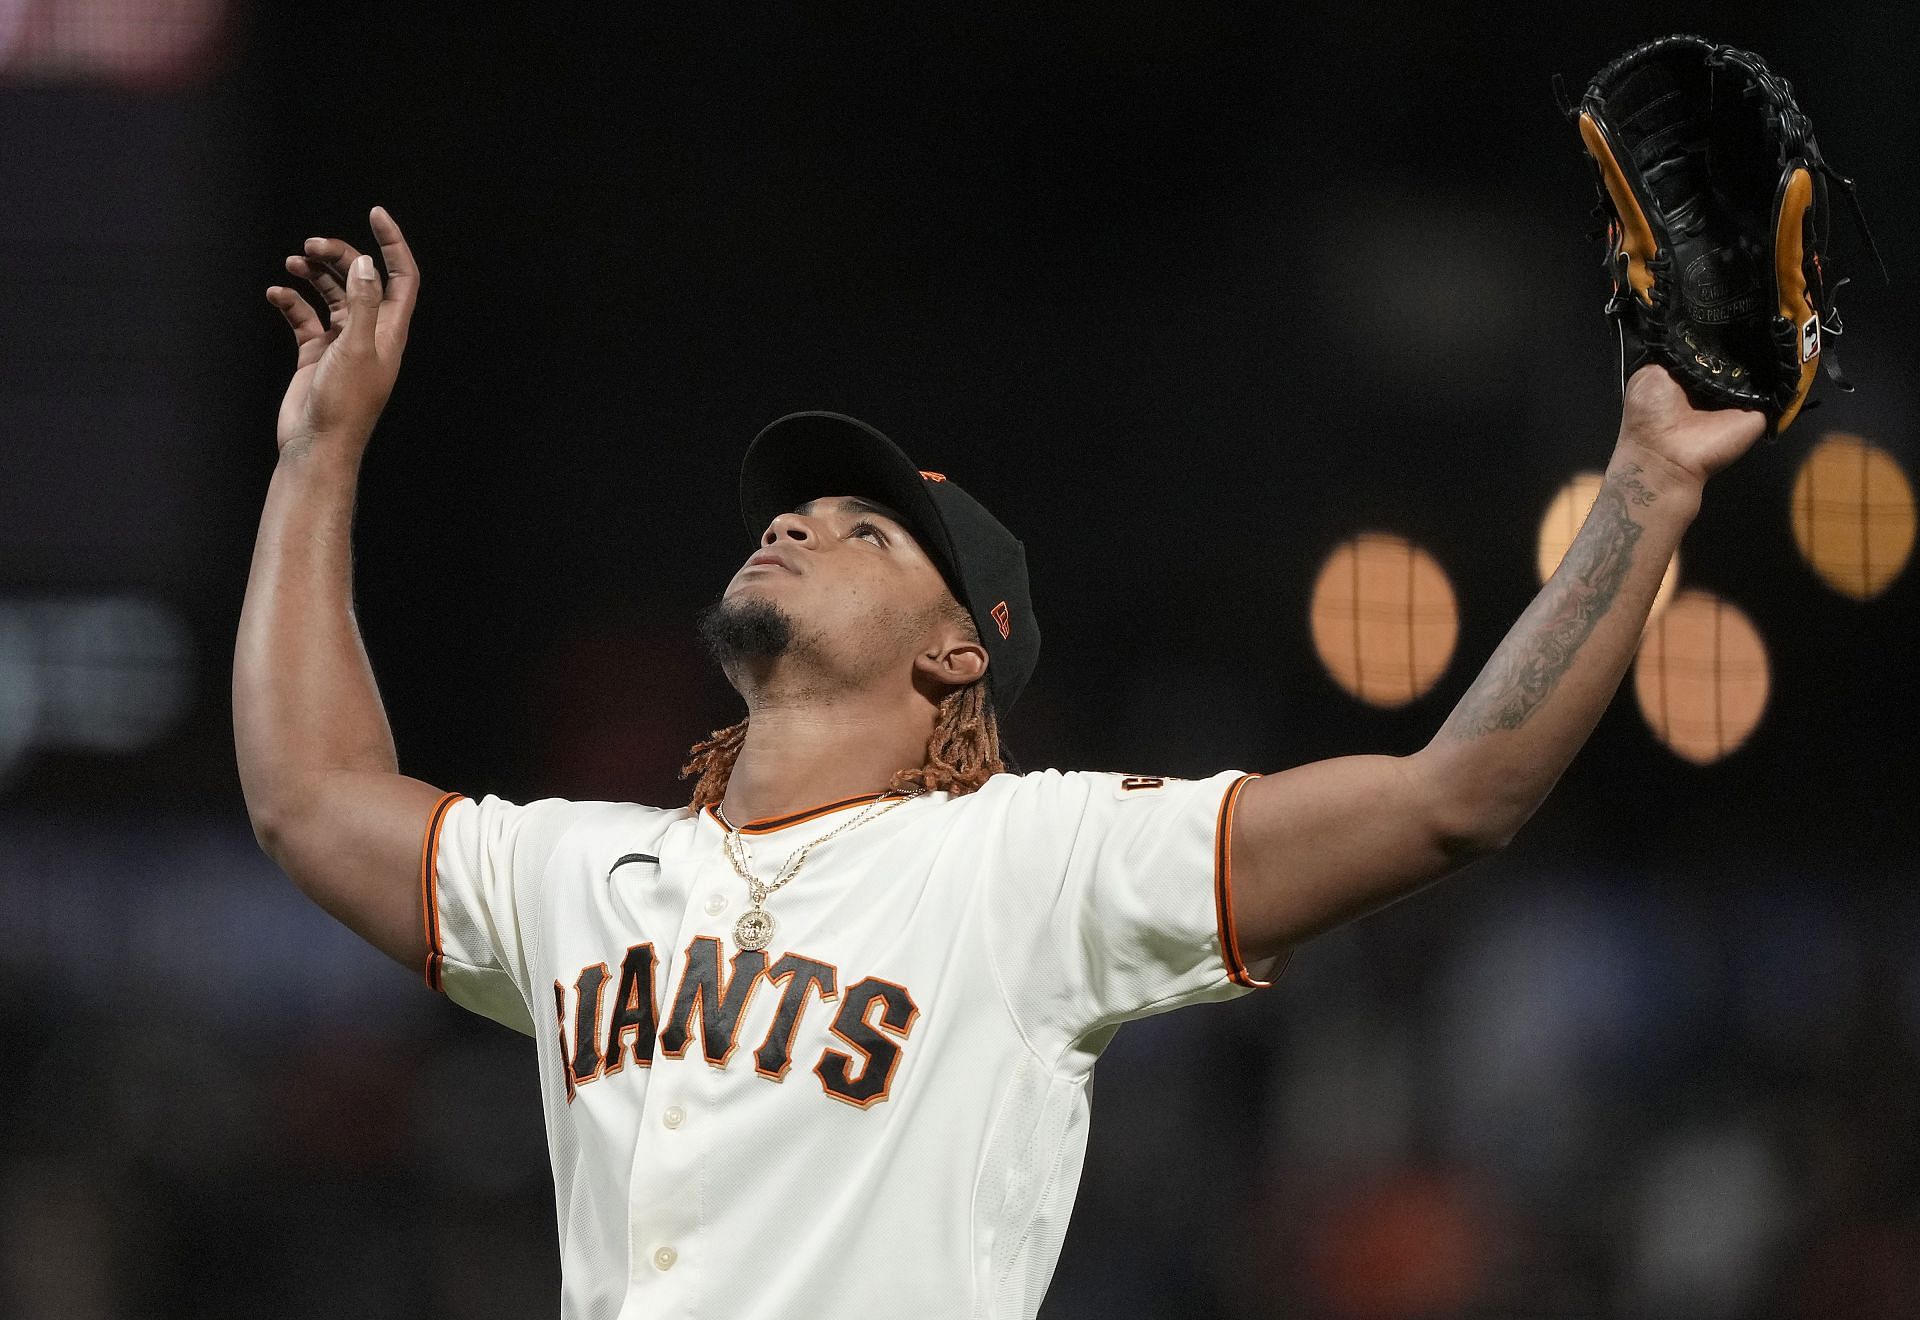 Camilo Doval celebrates a strikeout to end the game and cinch the win for the Giants.